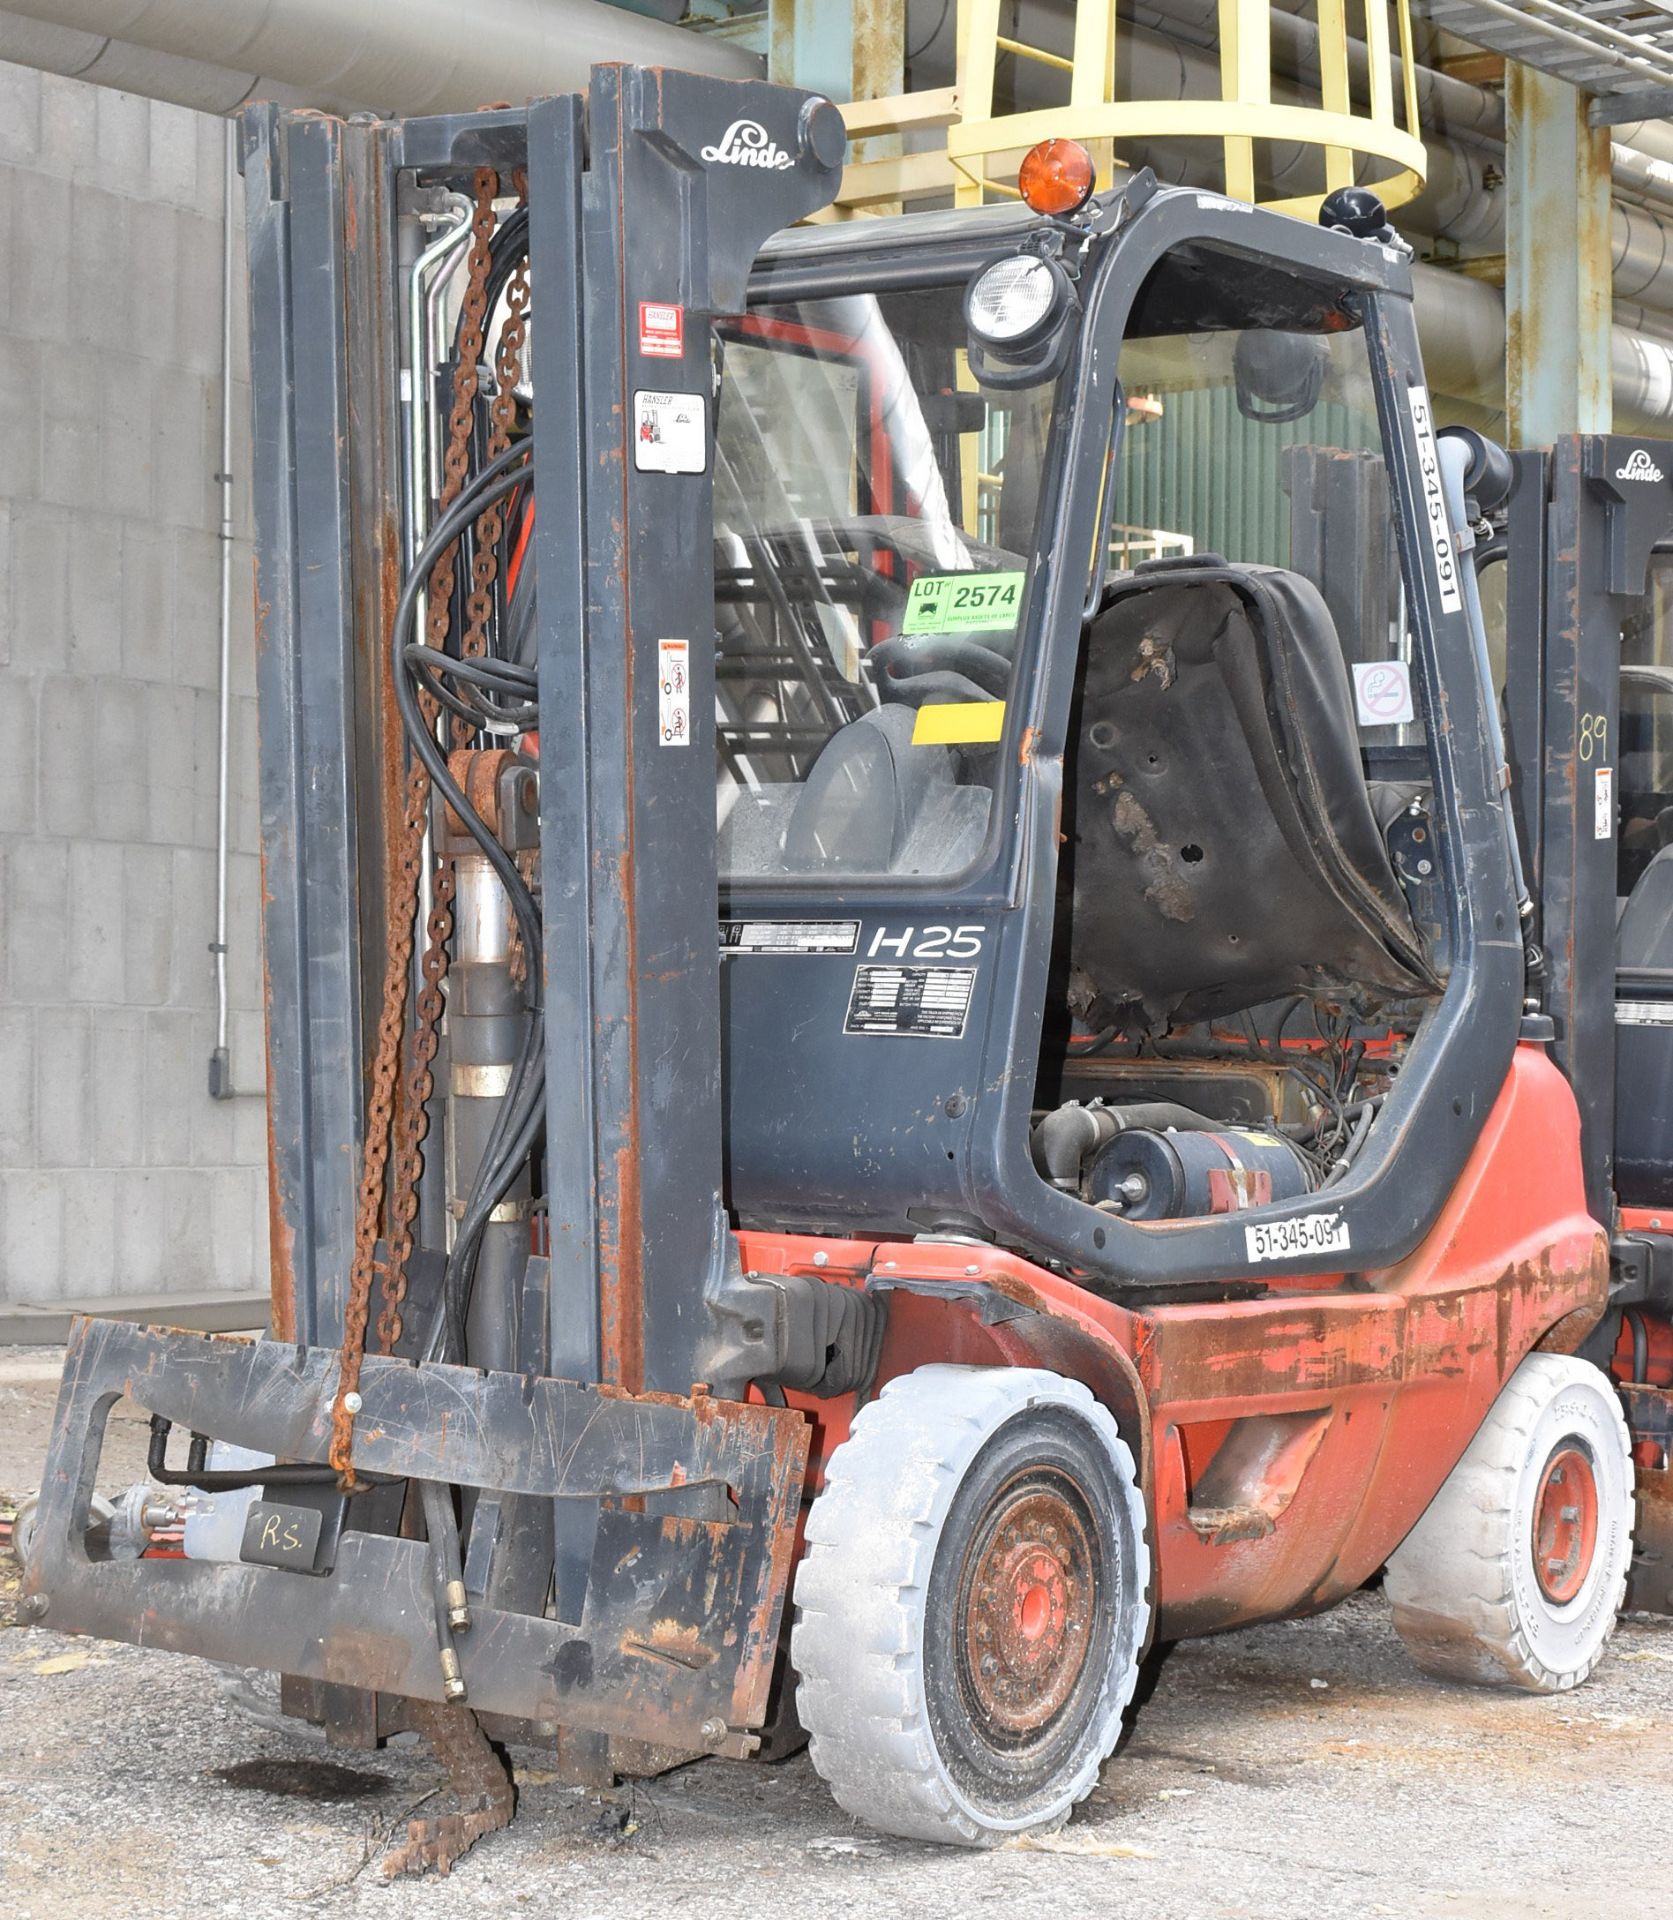 LINDE H25T 3,475 LB. CAPACITY LPG FORKLIFT WITH 183" MAX. LIFT HEIGHT, 2-STAGE MAST, MULTI-SURFACE